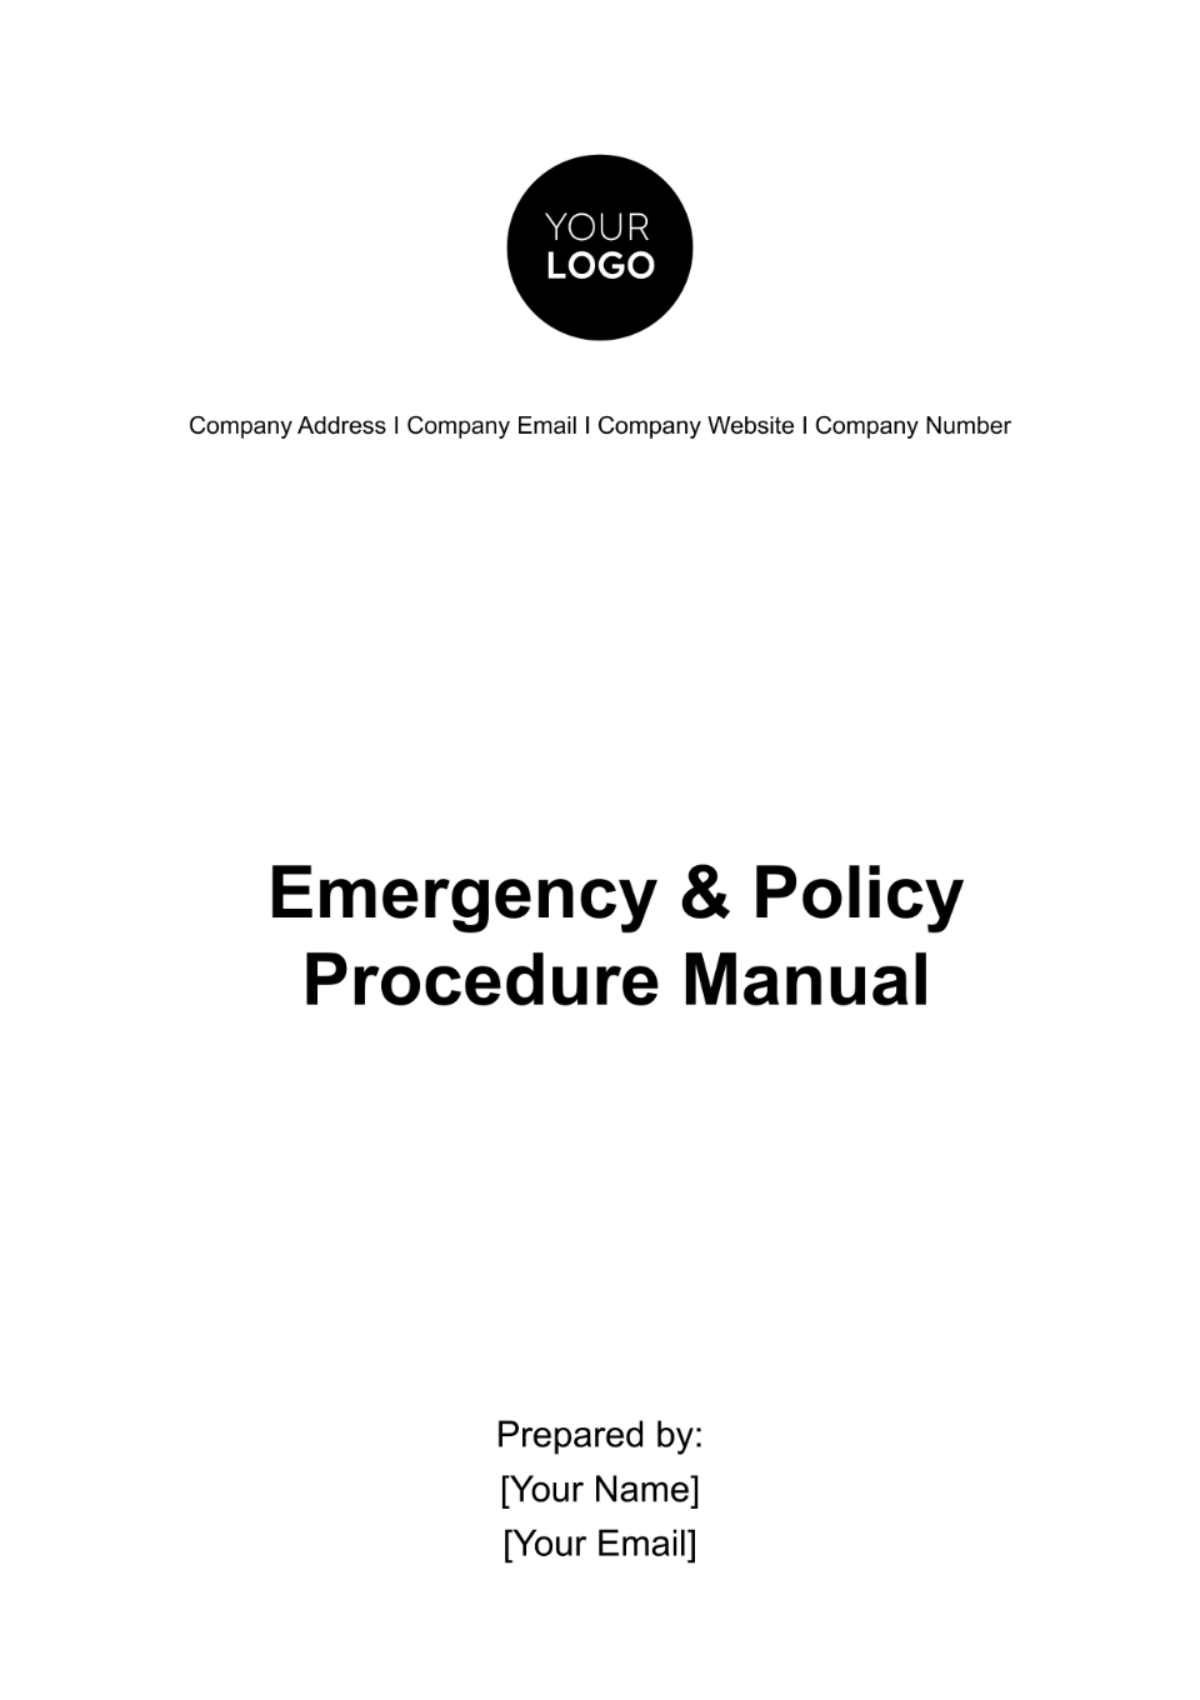 Free Emergency Policy & Procedure Manual Template